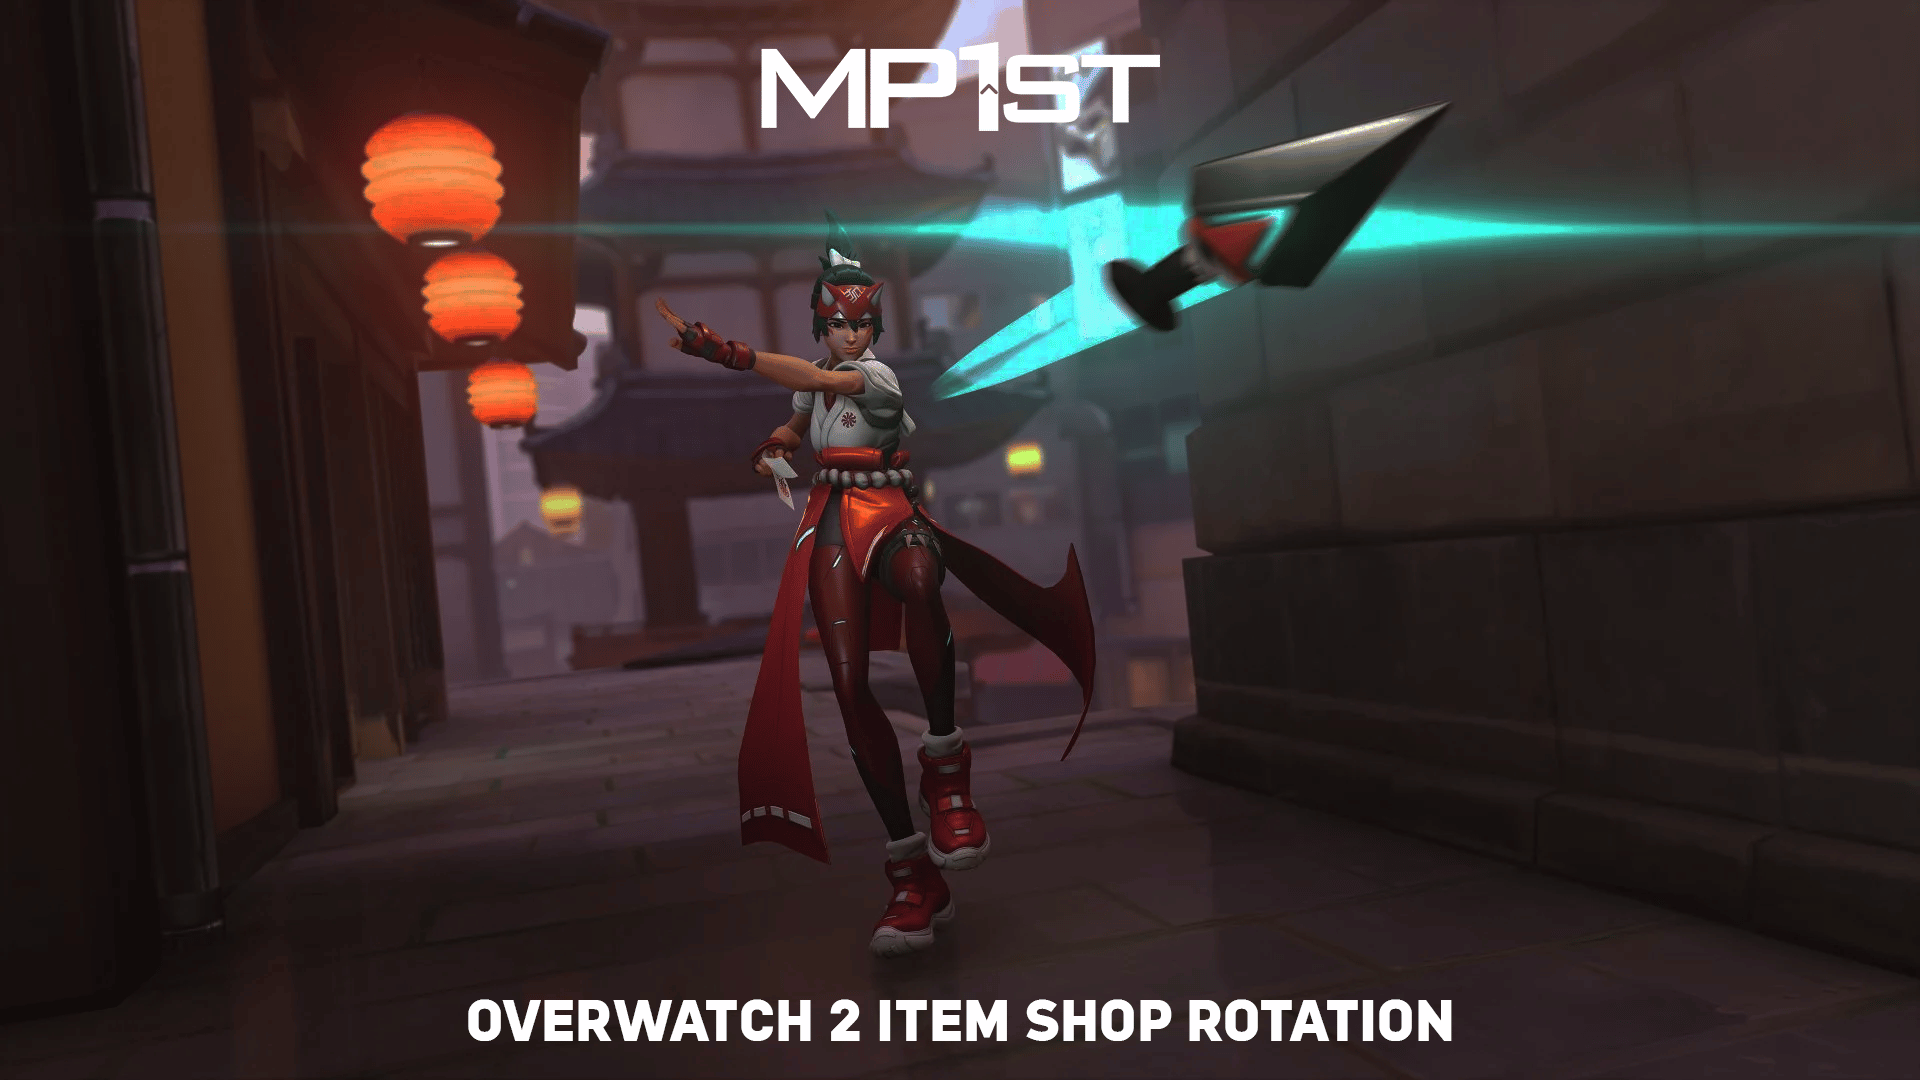 Overwatch 2 Item Shop Rotation for June 20